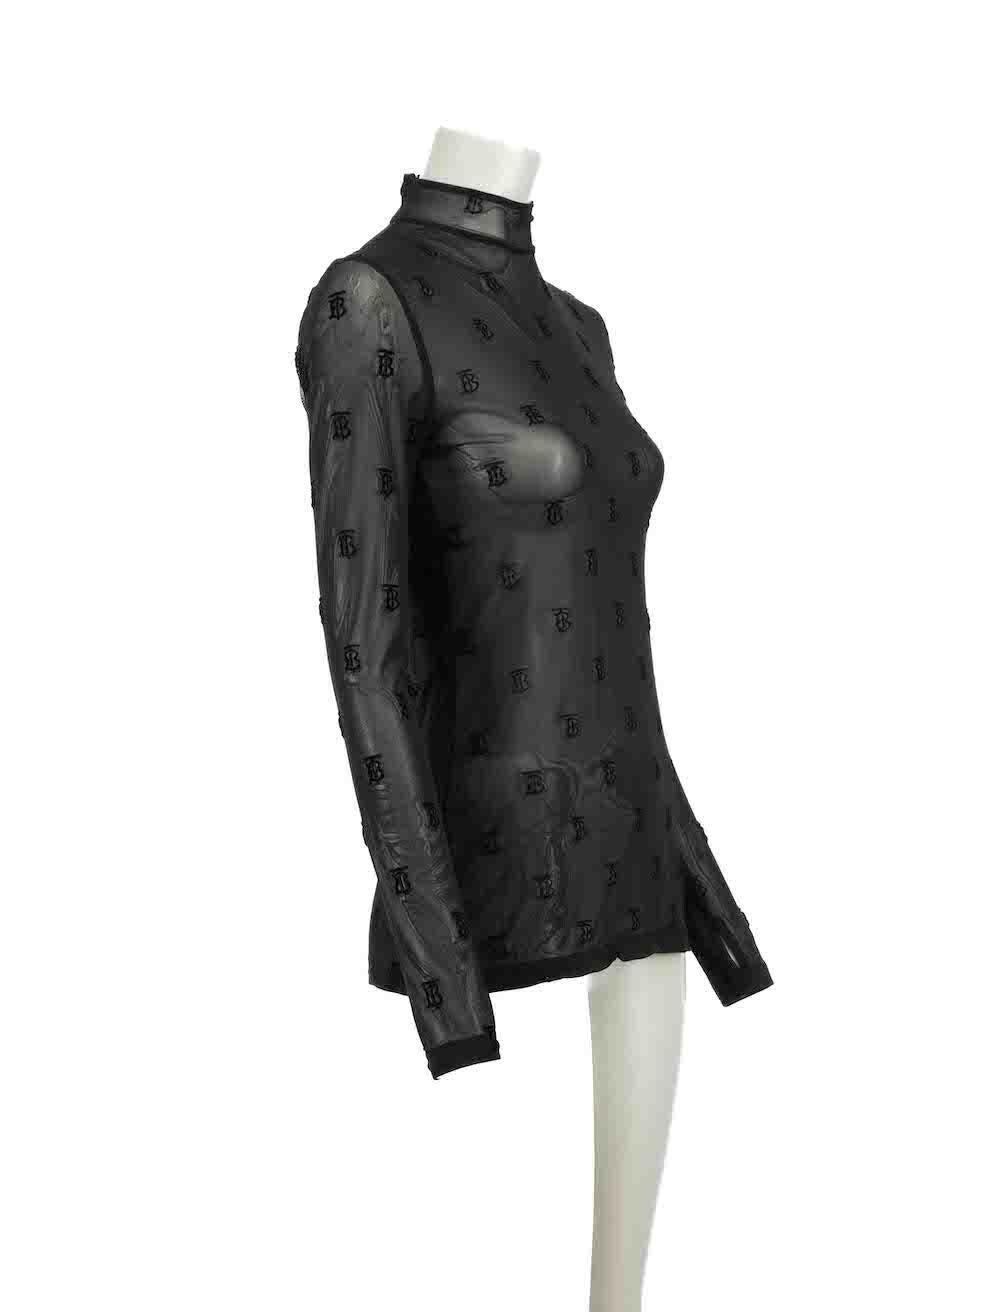 CONDITION is Very good. Hardly any visible wear to top is evident on this used Burberry designer resale item.
 
Details
Black
Synthetic
Top
Sheer
Logo pattern
Mock neck
Long sleeves
Back zip fastening
 
Composition
NO COMPOSITION LABEL BUT FEELS